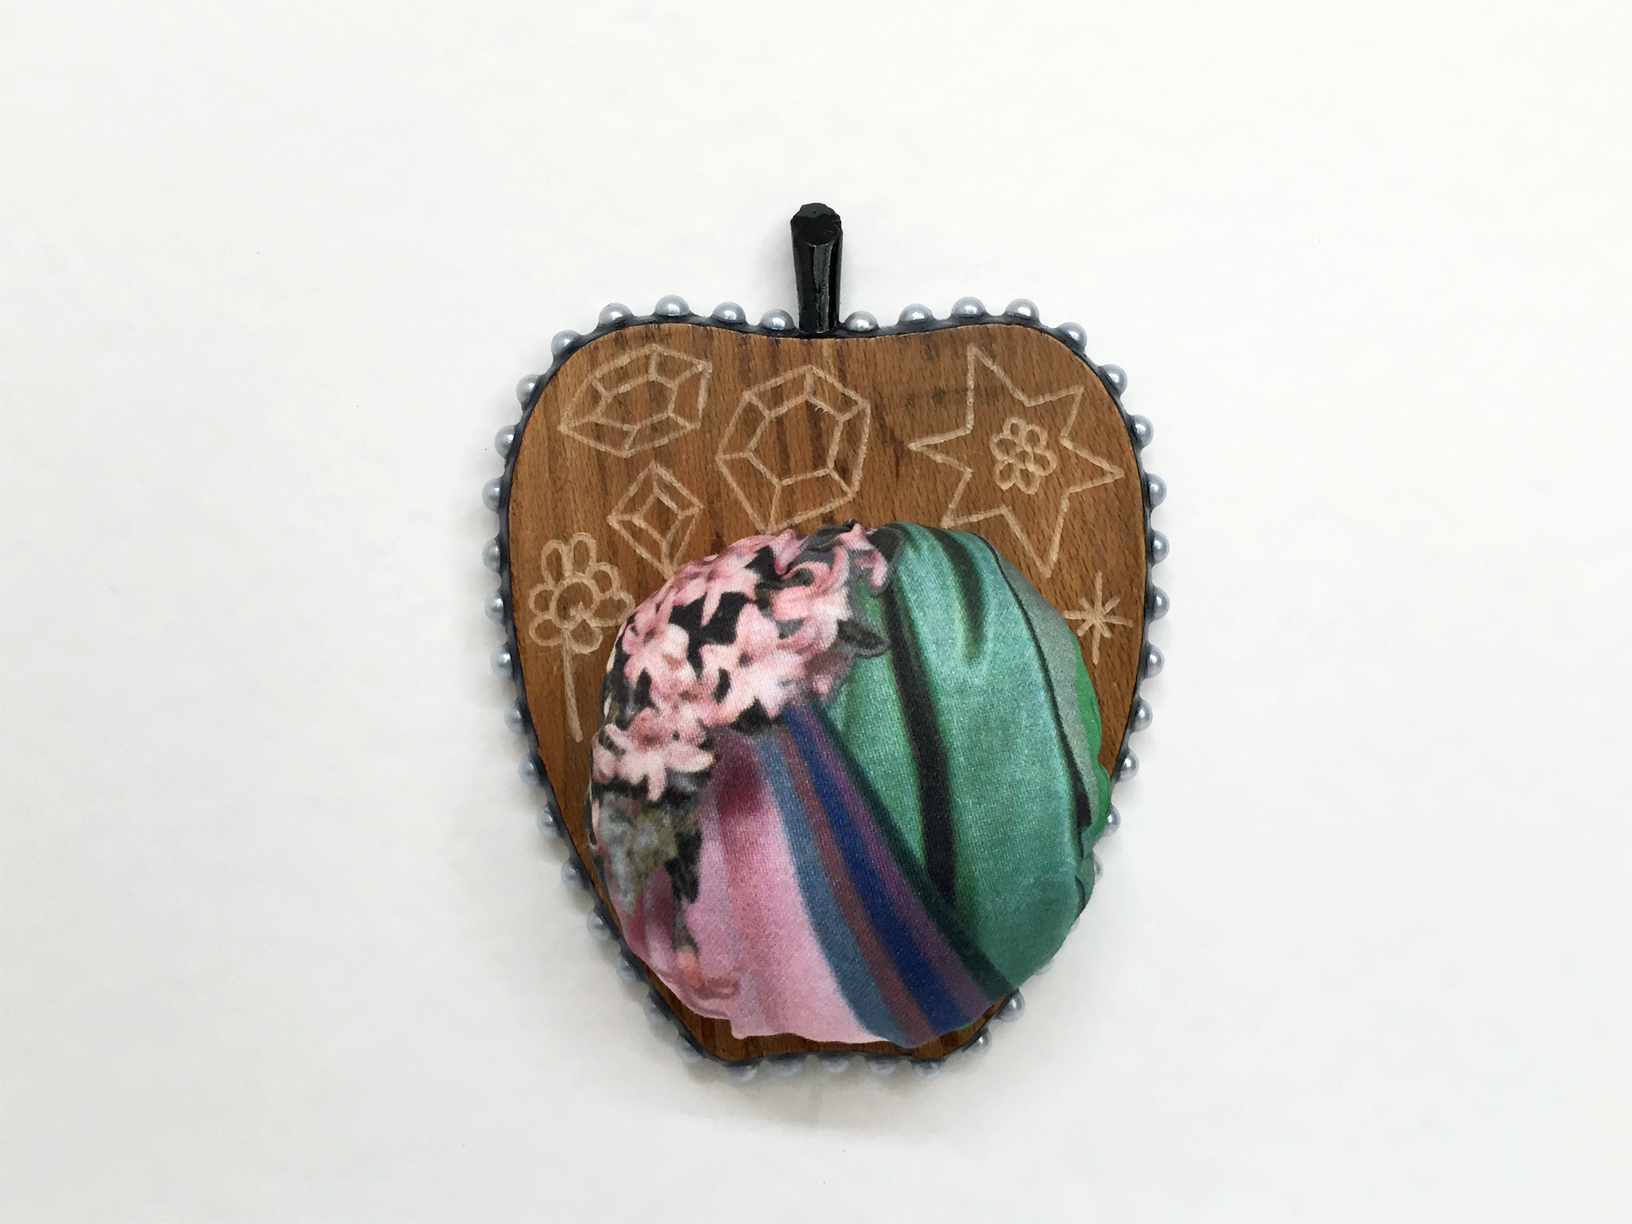 Apple Isle Pincushion #1, 2019, found wood coaster (engraved), handmade paper collage digitally printed on cotton sateen, plastic pearls, acrylic paint, resin, 120mm x 96mm